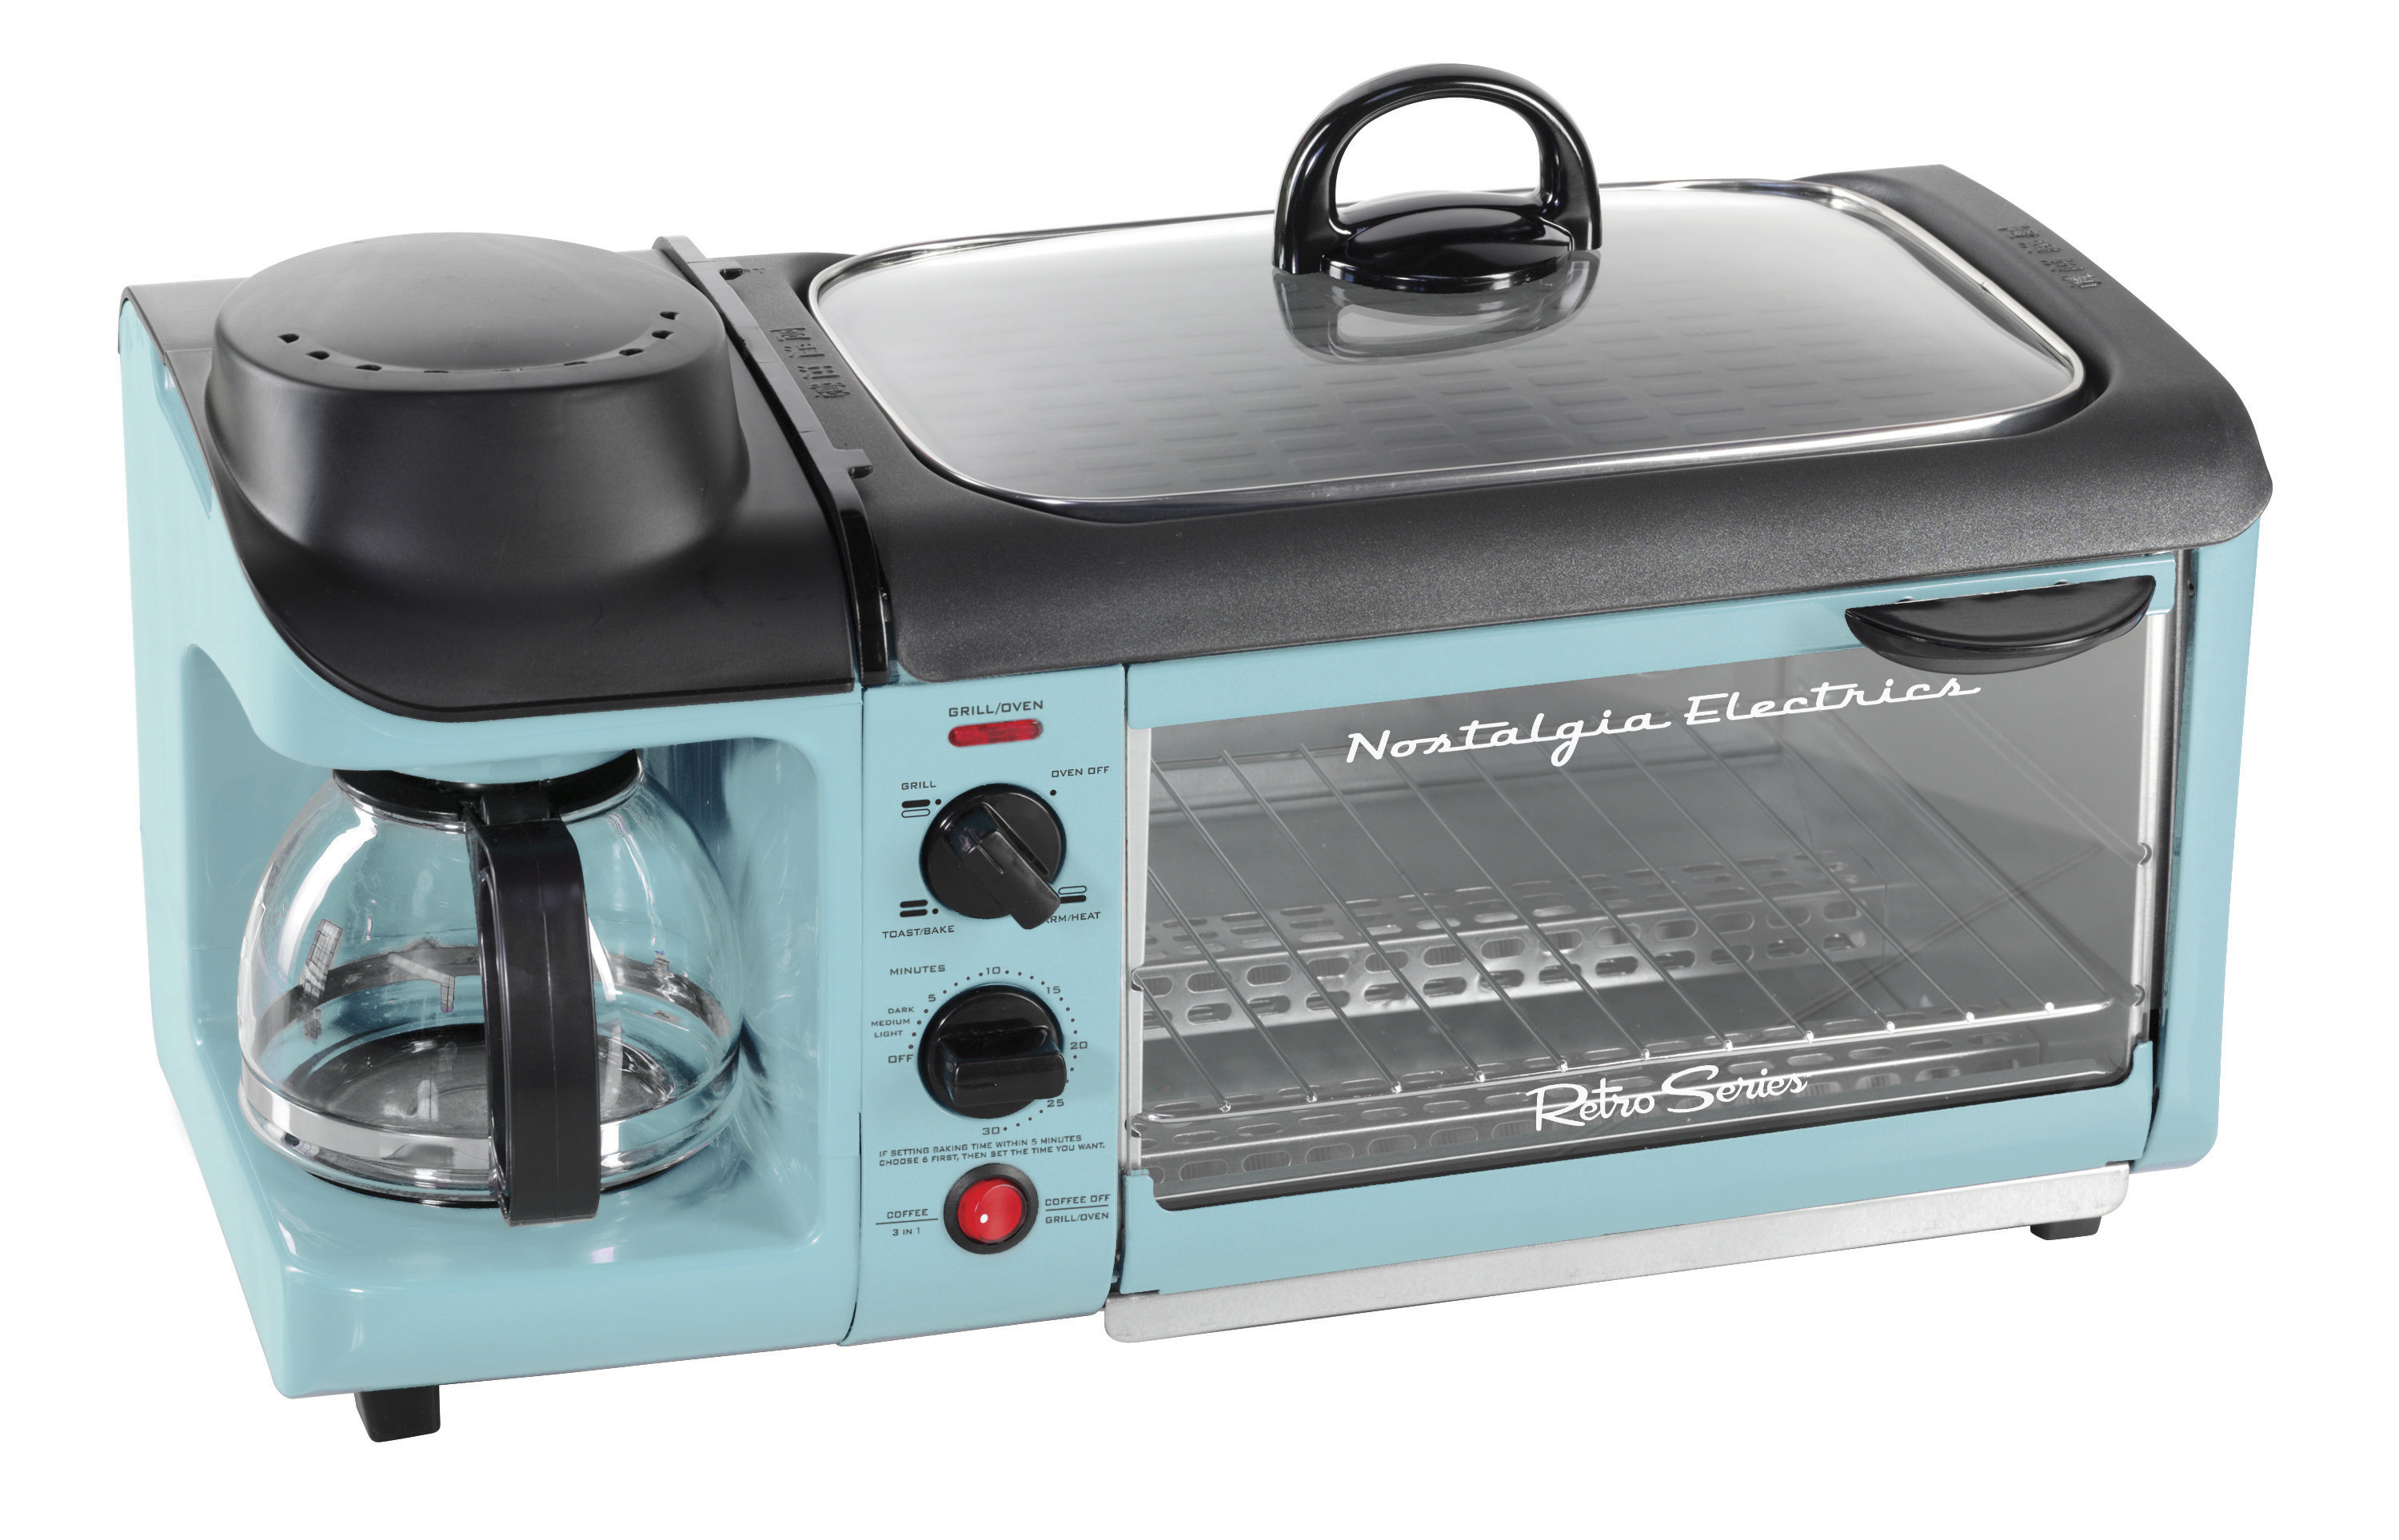 Nostalgia BST3AQ Retro 3-in-1 Family Size Electric Breakfast Station, Coffeemaker, Griddle, Toaster Oven - Aqua - image 1 of 7